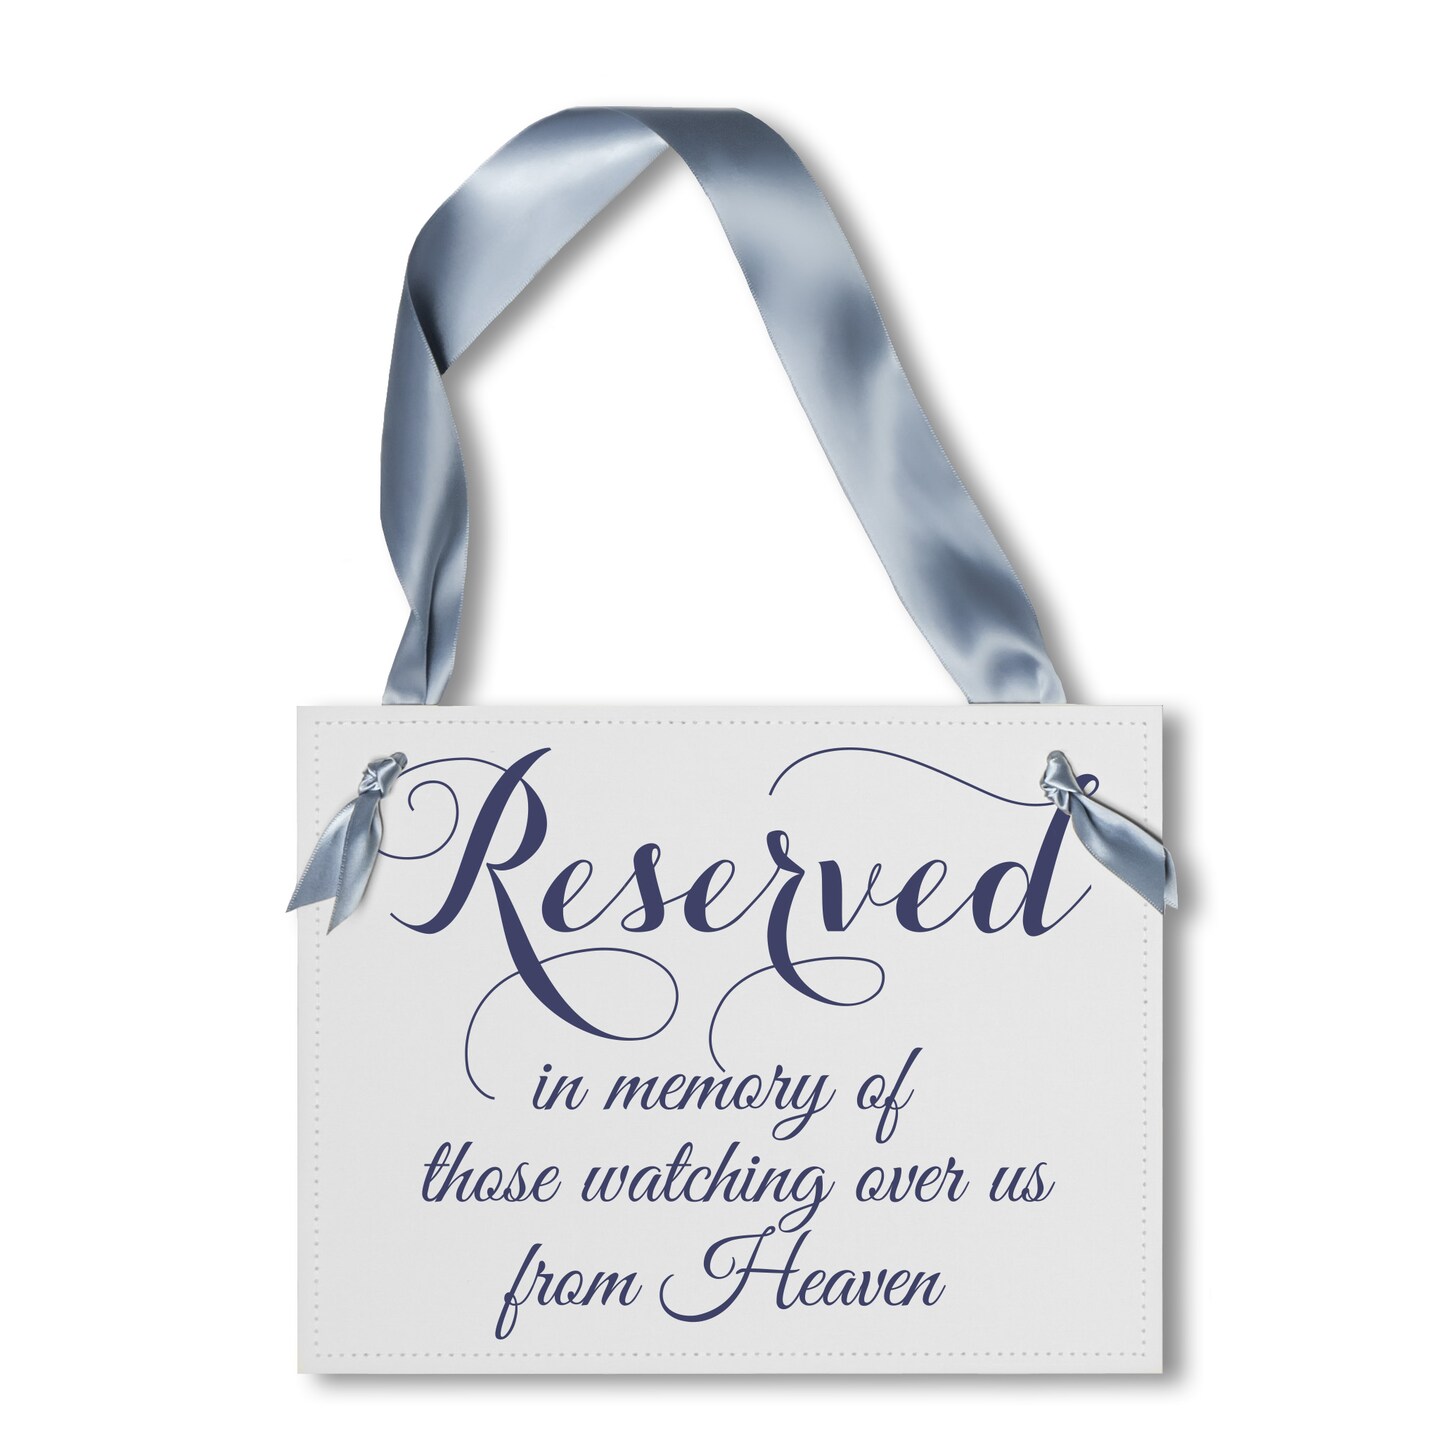 Ritzy Rose Memorial Chair Sign - Navy Blue on 11x8in White Linen Cardstock with Dusty Blue Ribbon